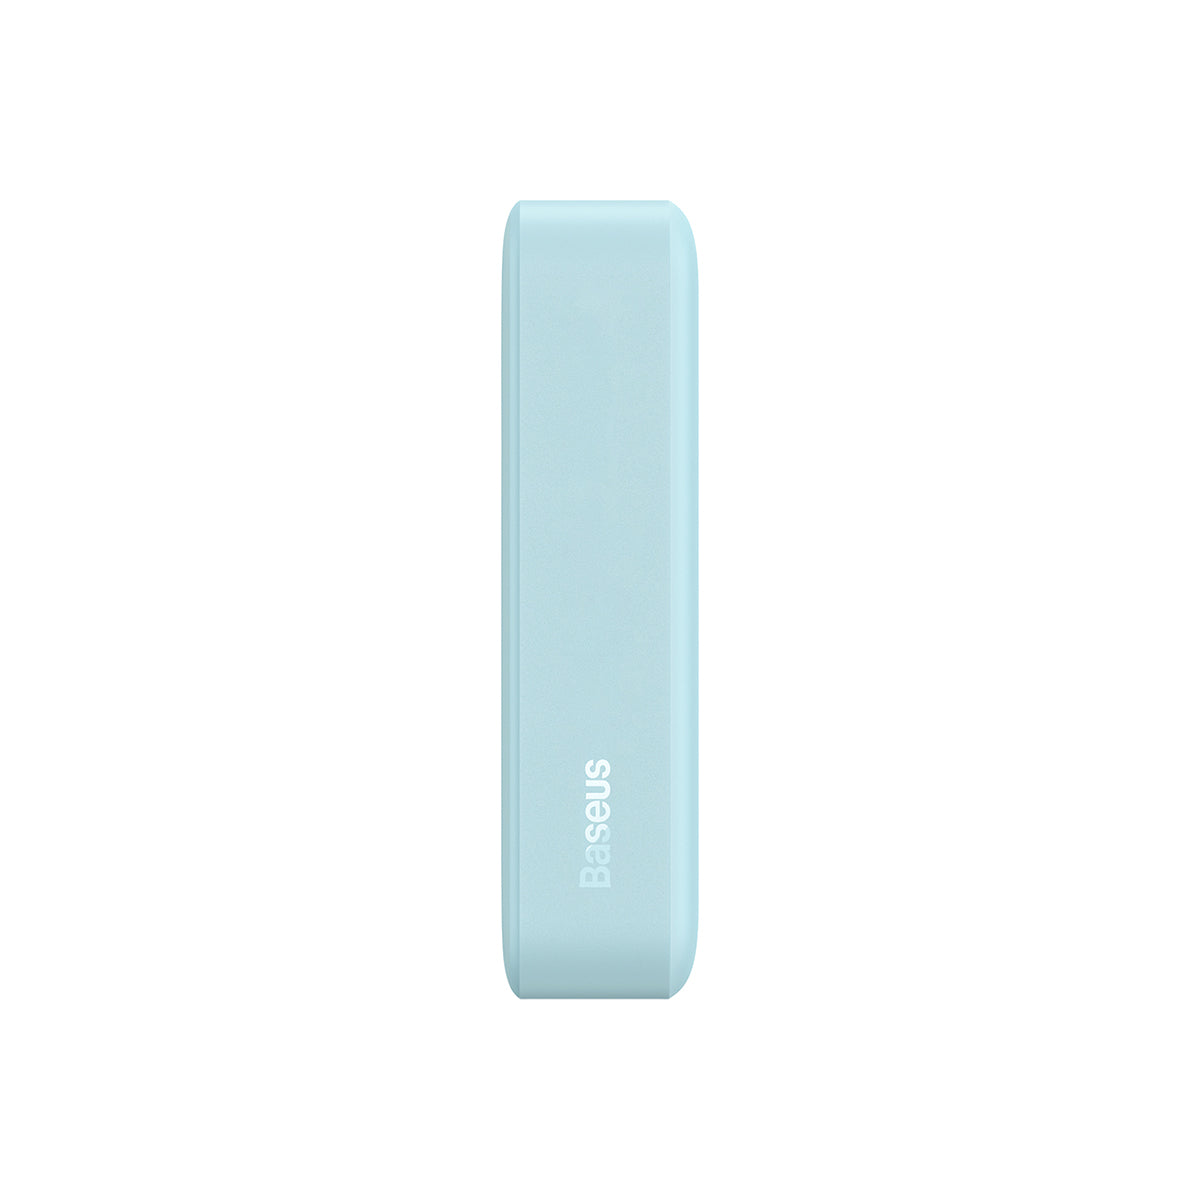 Powerbank Baseus Magnetic Mini 20000mAh 20W MagSafe (blue) PPCX150003 buy  in the online store at Best Price